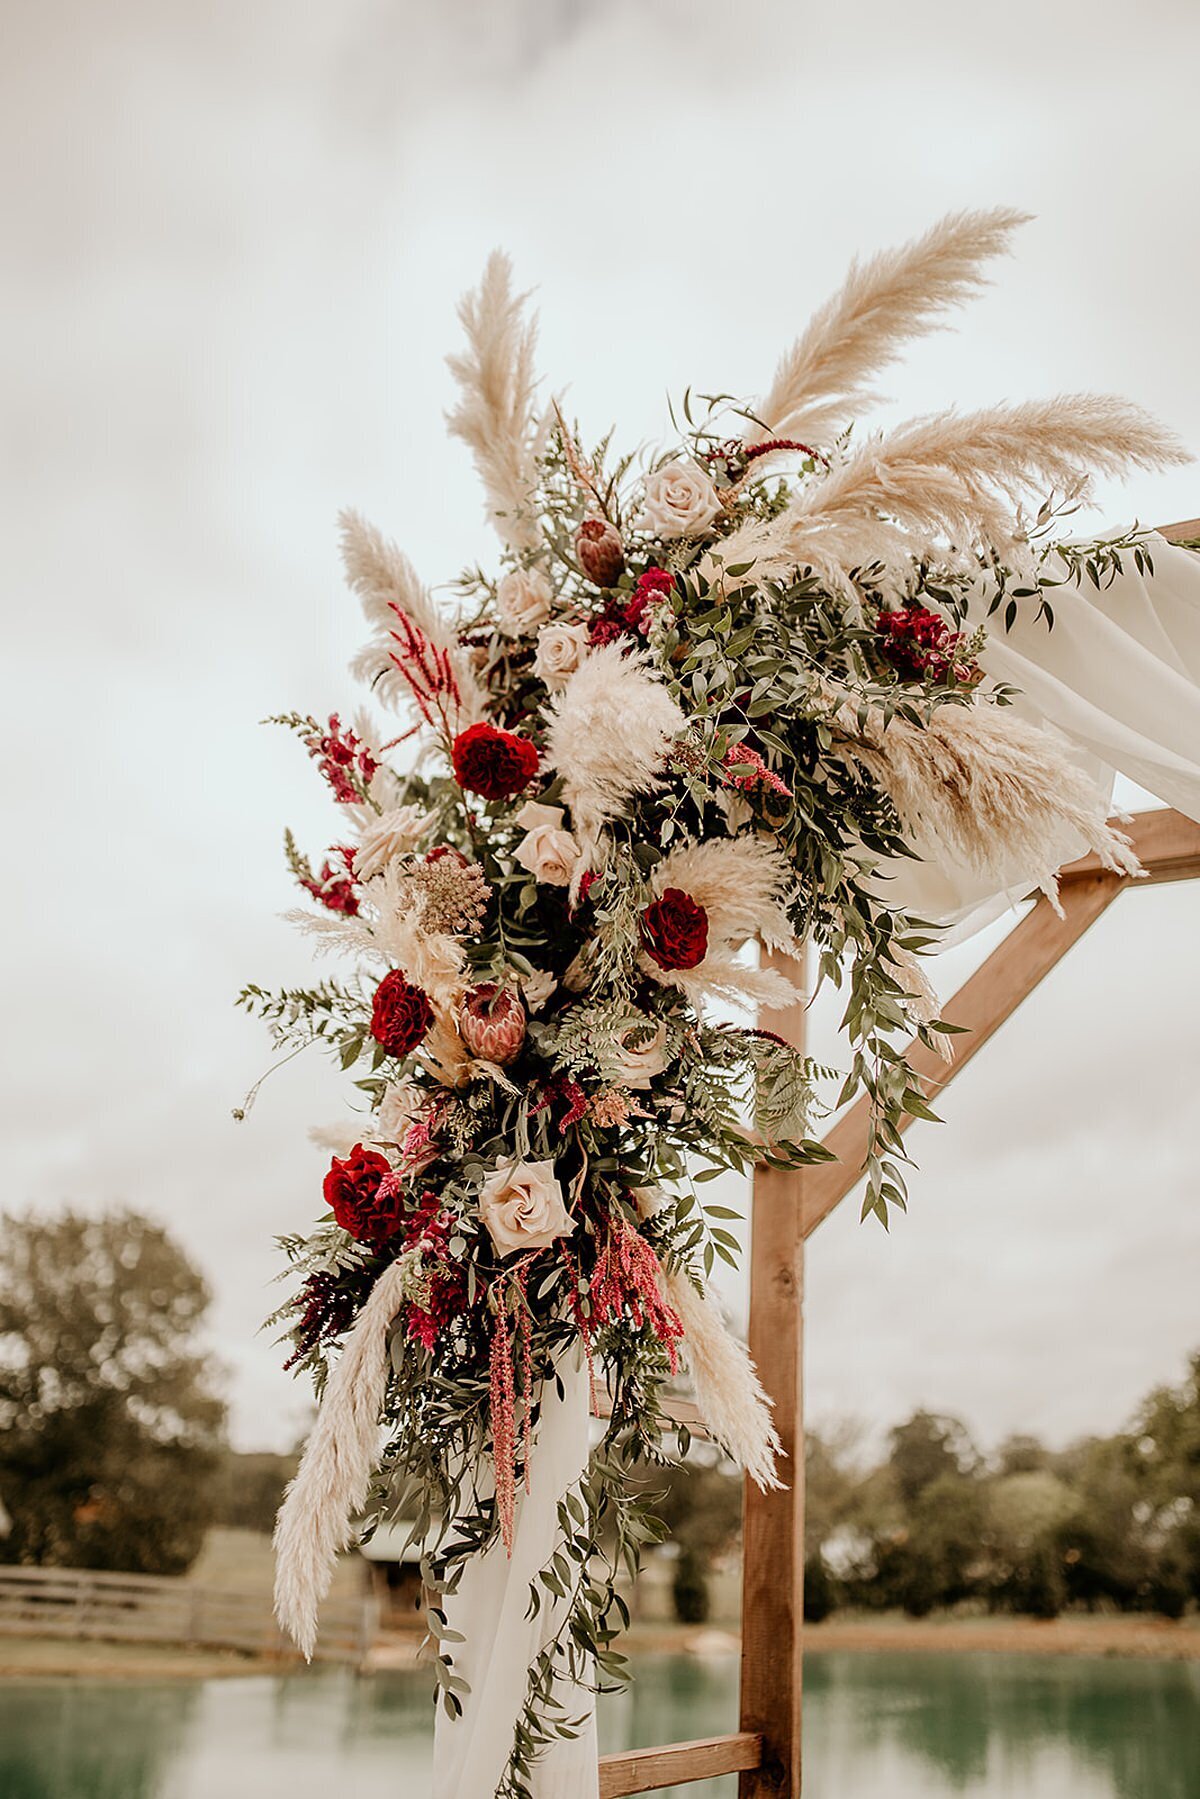 Wood ceremony arbor at Steel Magnolia Barn decorated with a boho floral spray of pampas grass, Italian ruscus, protea, burgundy carnations, blush roses, and pink rice flower along a pond.